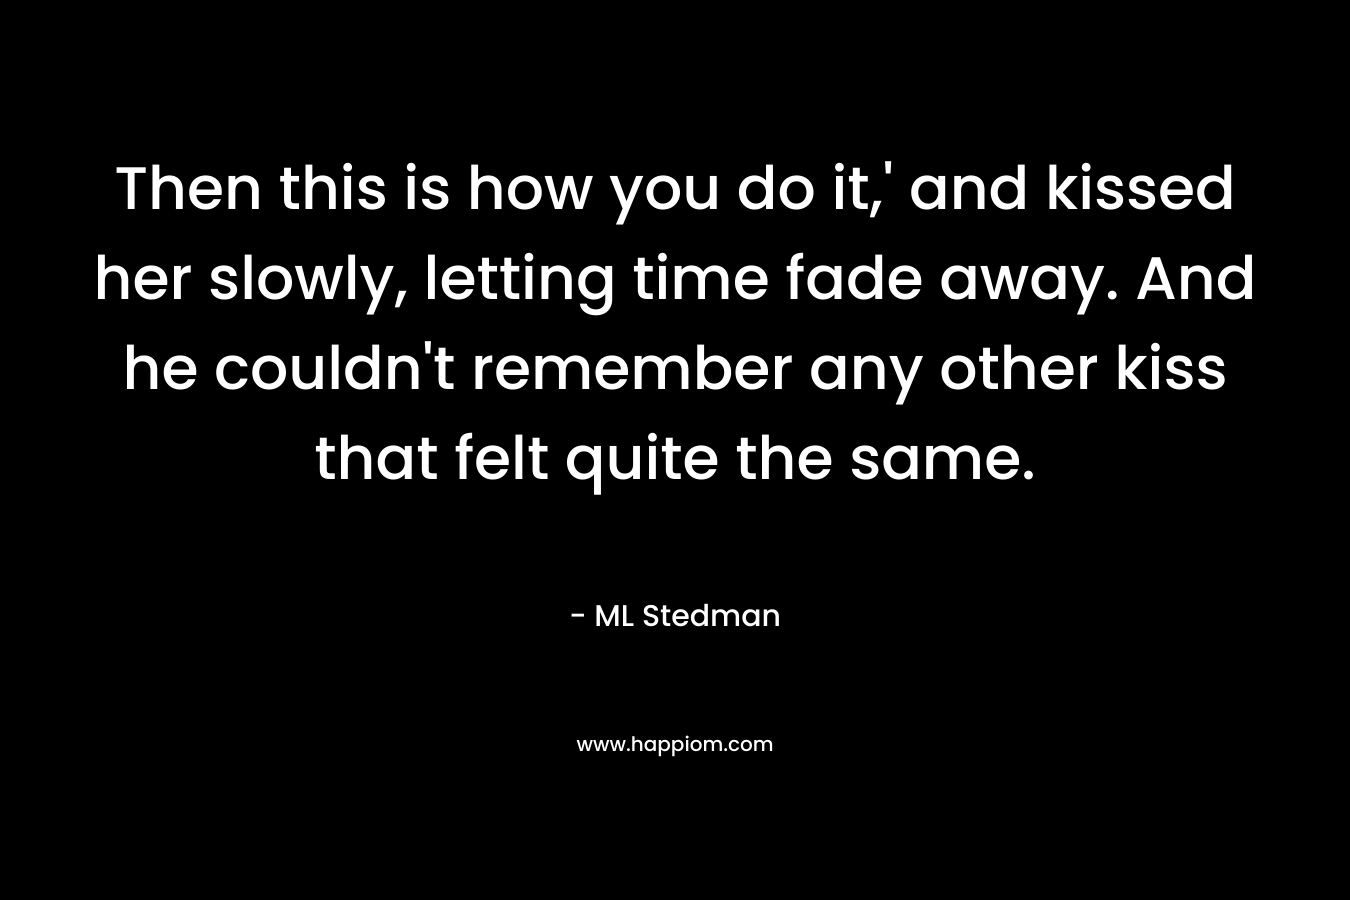 Then this is how you do it,’ and kissed her slowly, letting time fade away. And he couldn’t remember any other kiss that felt quite the same. – ML Stedman